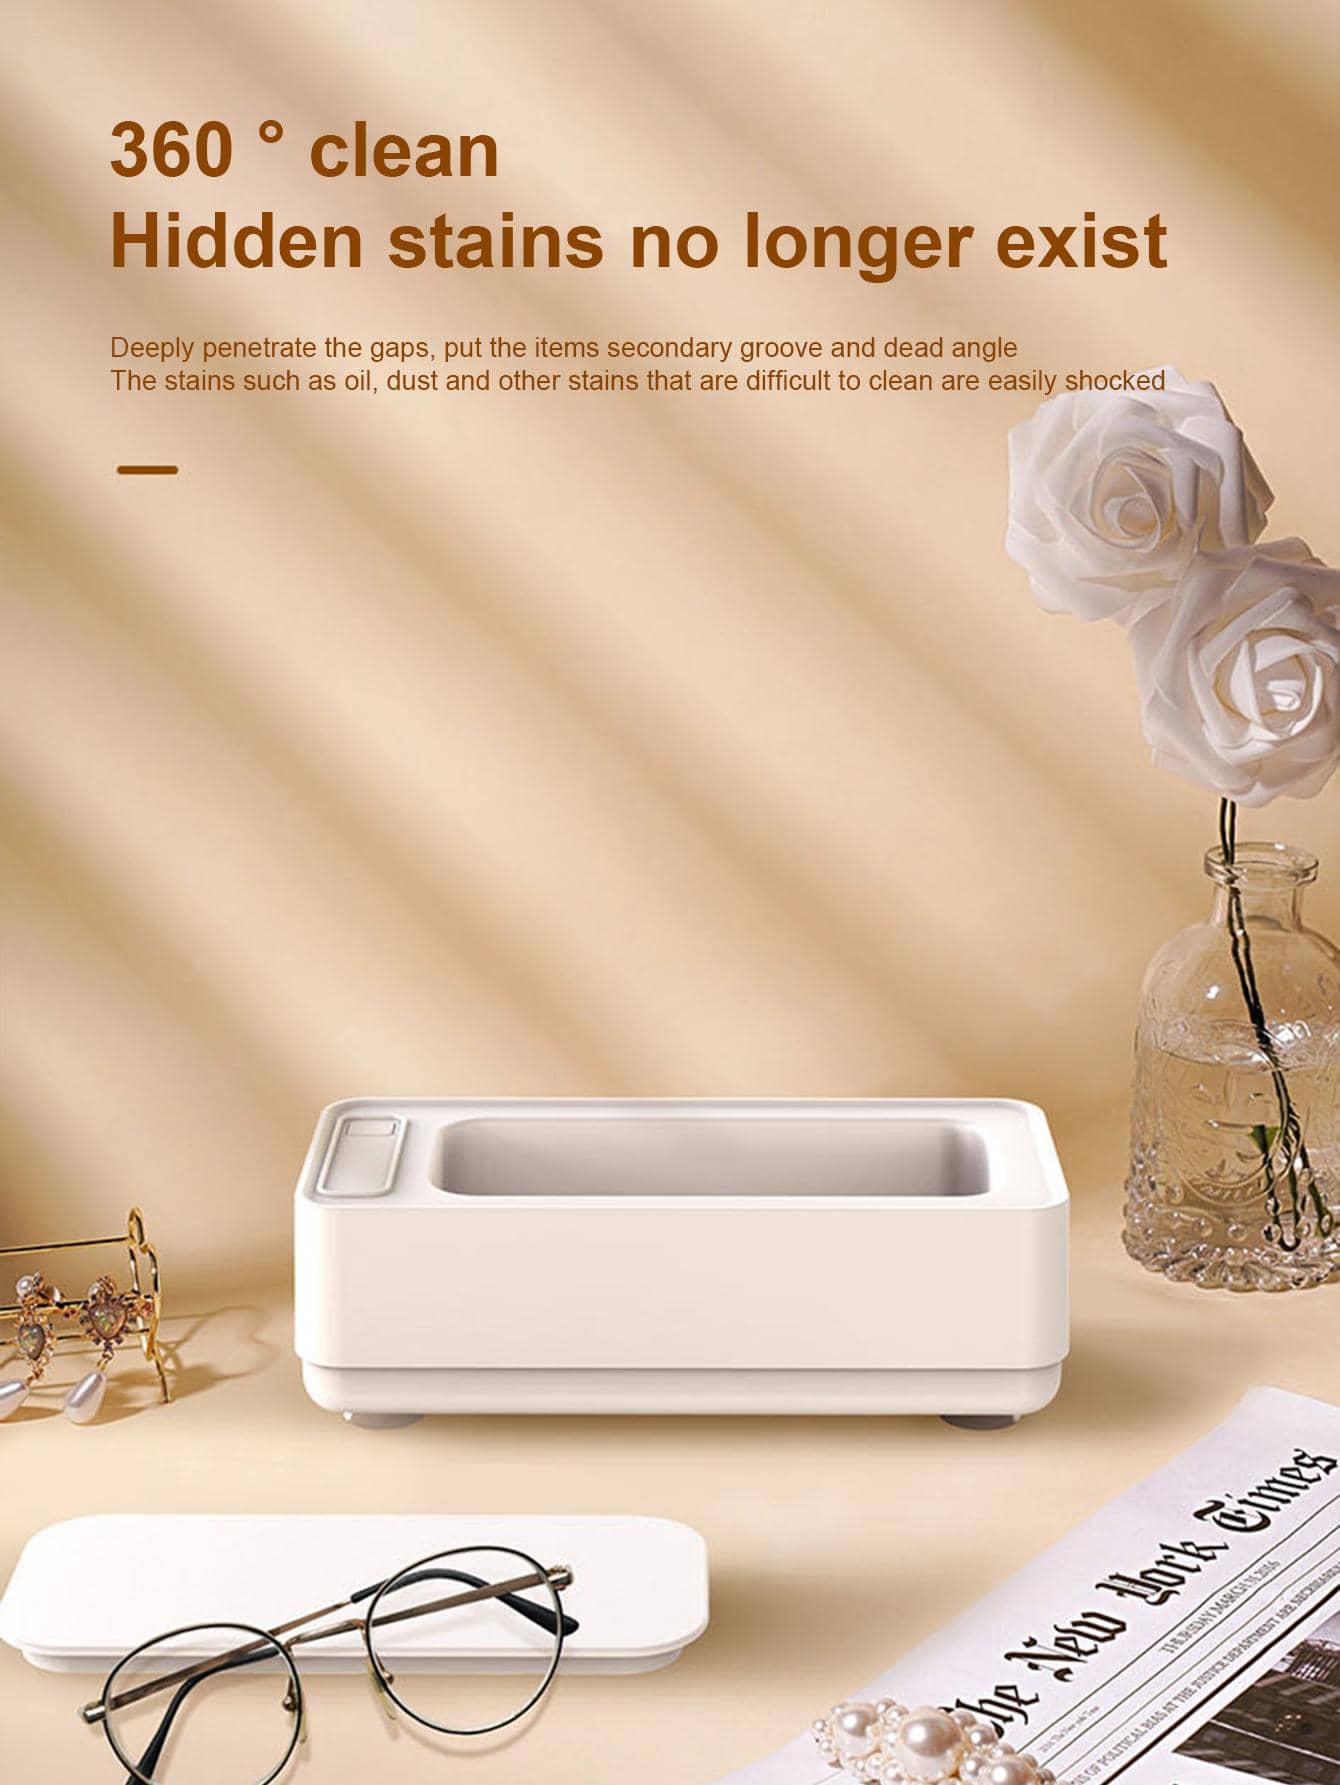 1pc ABS Ultrasonic Cleaner, Modern Multifunction Portable Cosmetic Brush Vibration Cleaner For Home